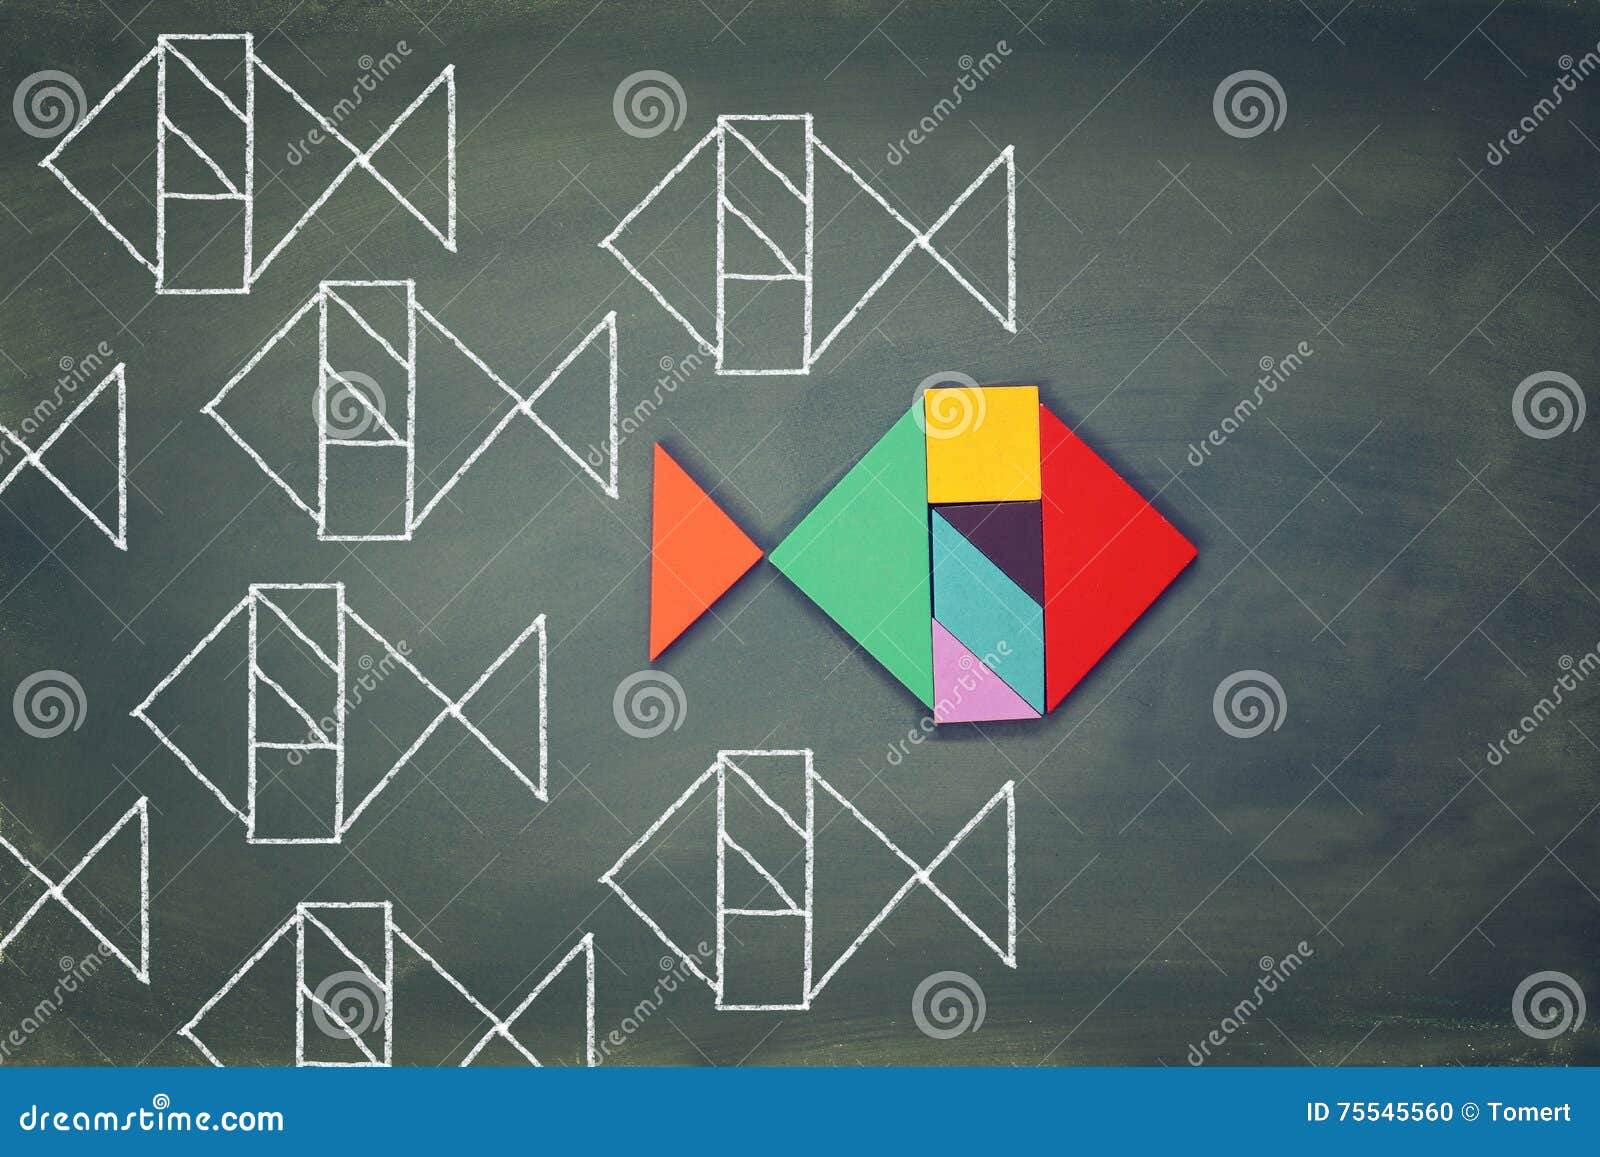 unique different fish made from tangram puzzle 